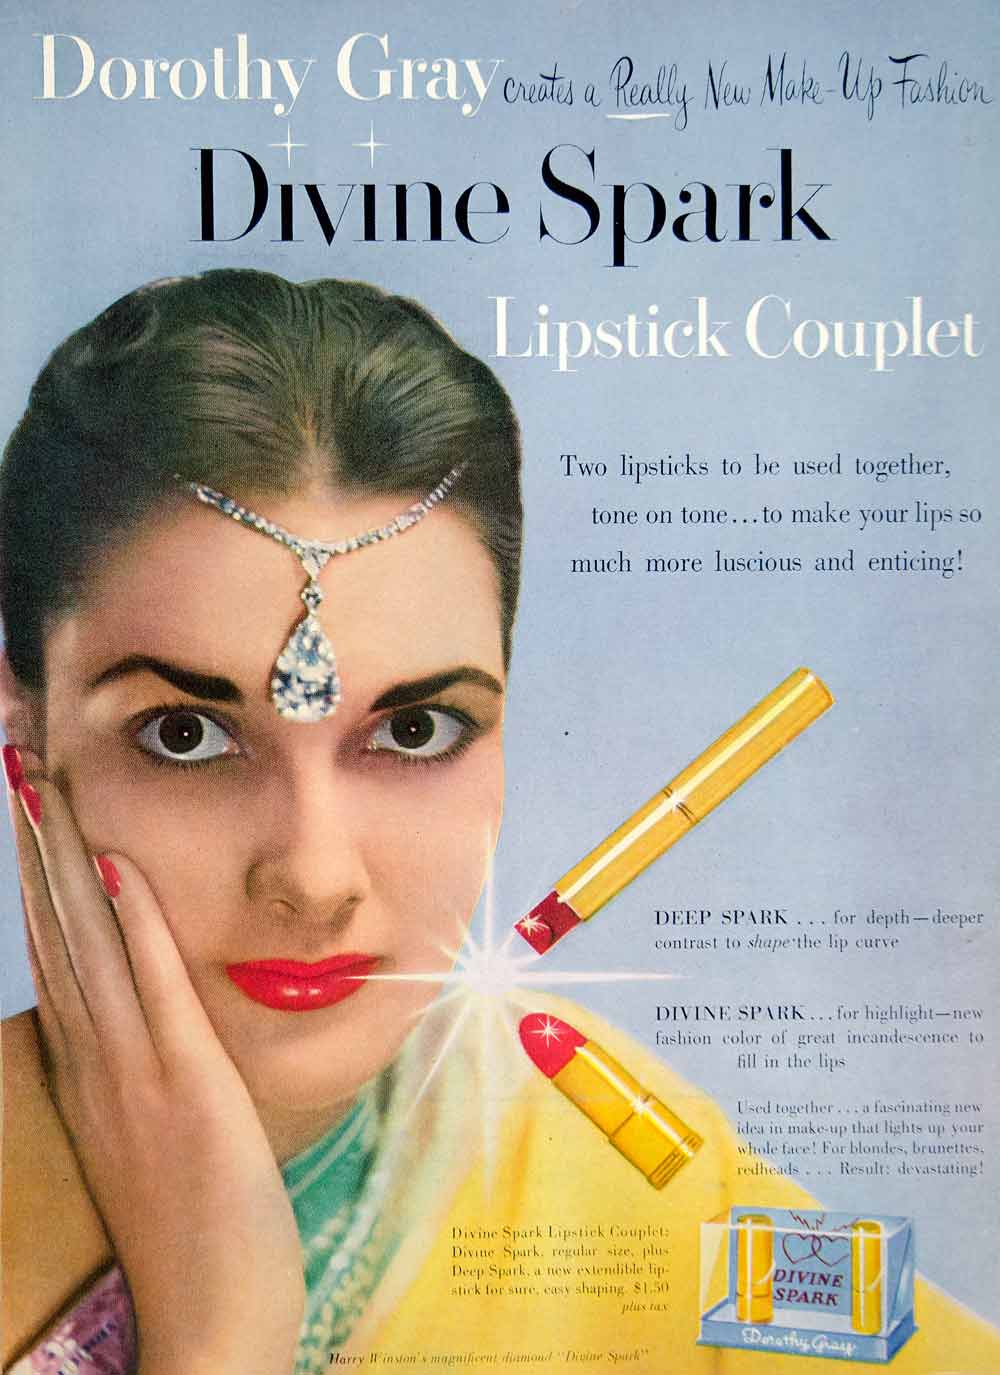 1949 Ad Dorothy Gray Divine Spark Lipstick Couplet Make-Up Cosmetic Lips YMM3